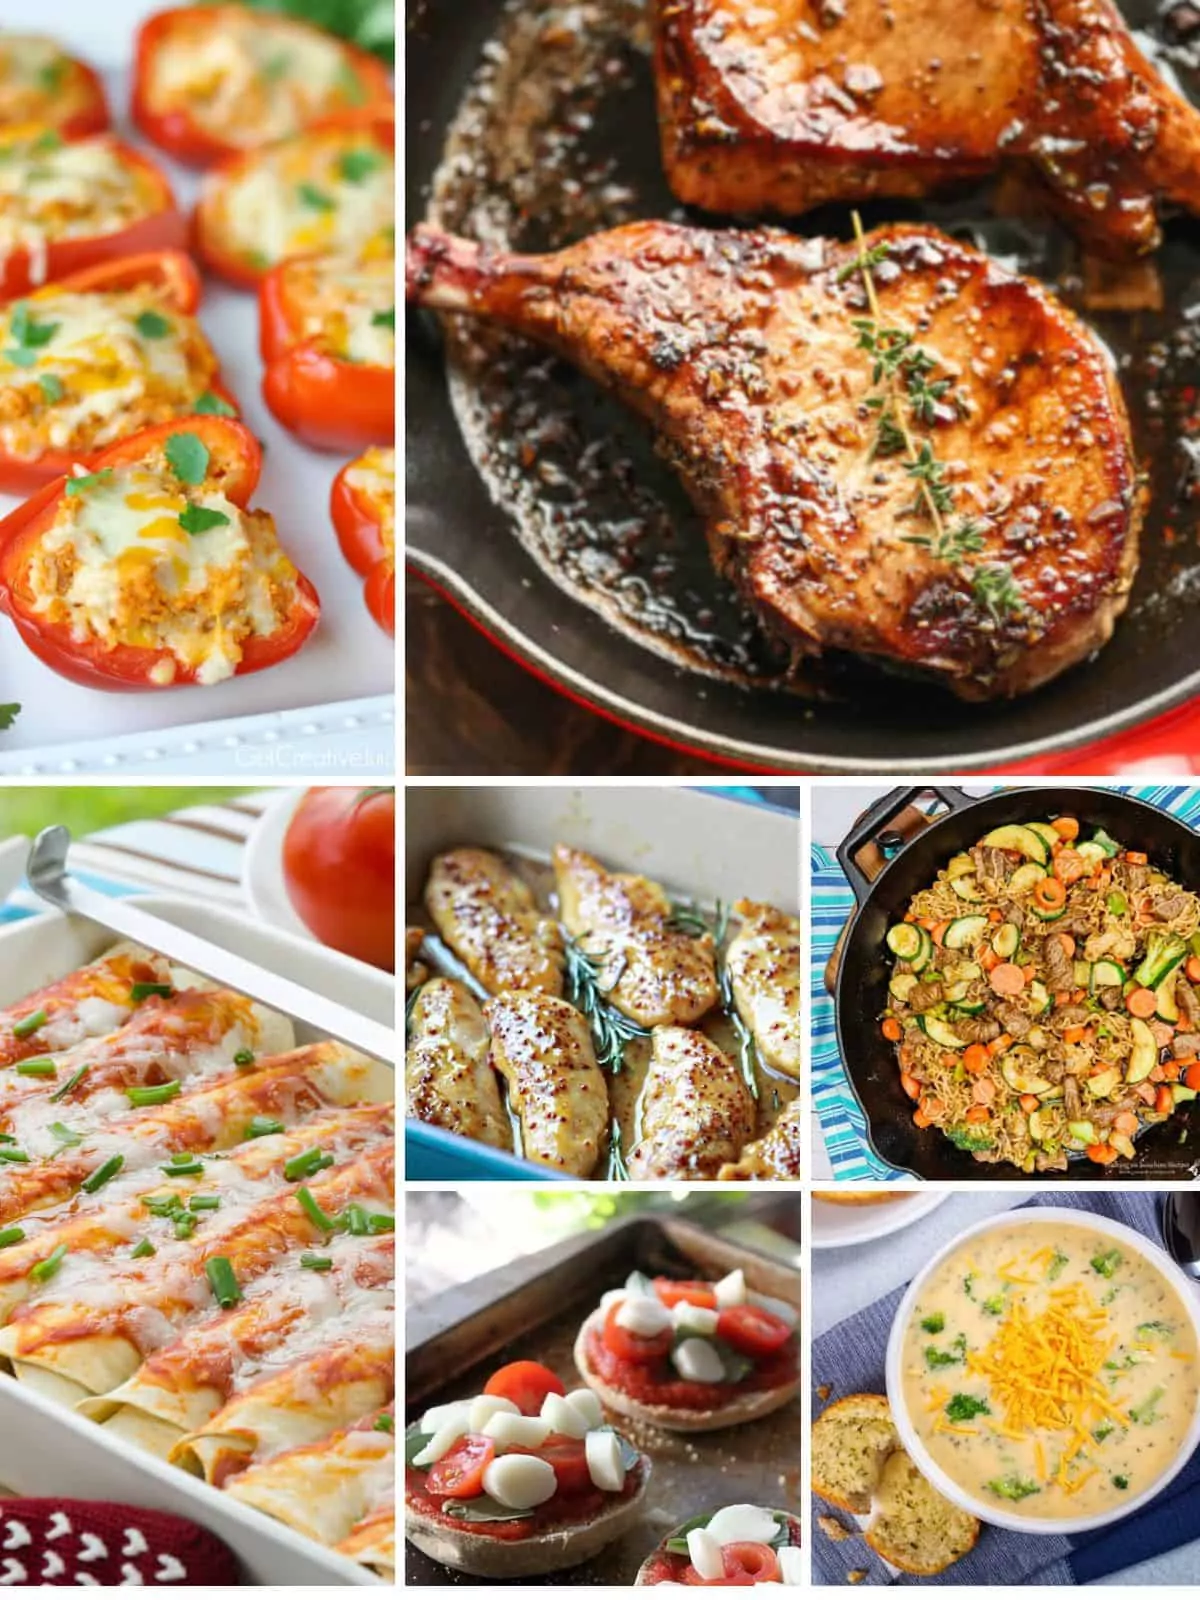 7 recipes ready in 30 minutes.